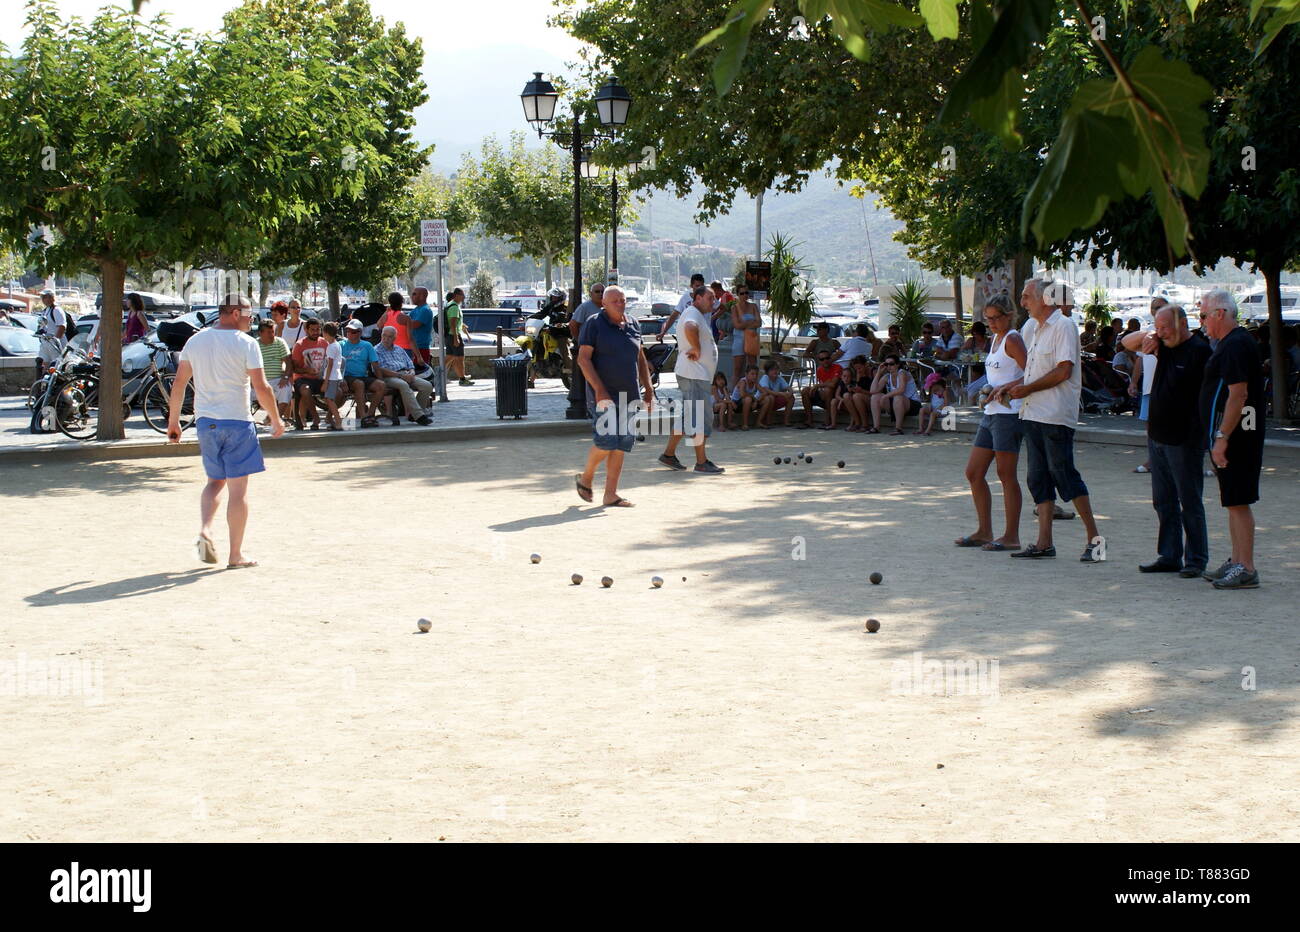 Playing the game of boules, St Florent, Corsica, France Stock Photo